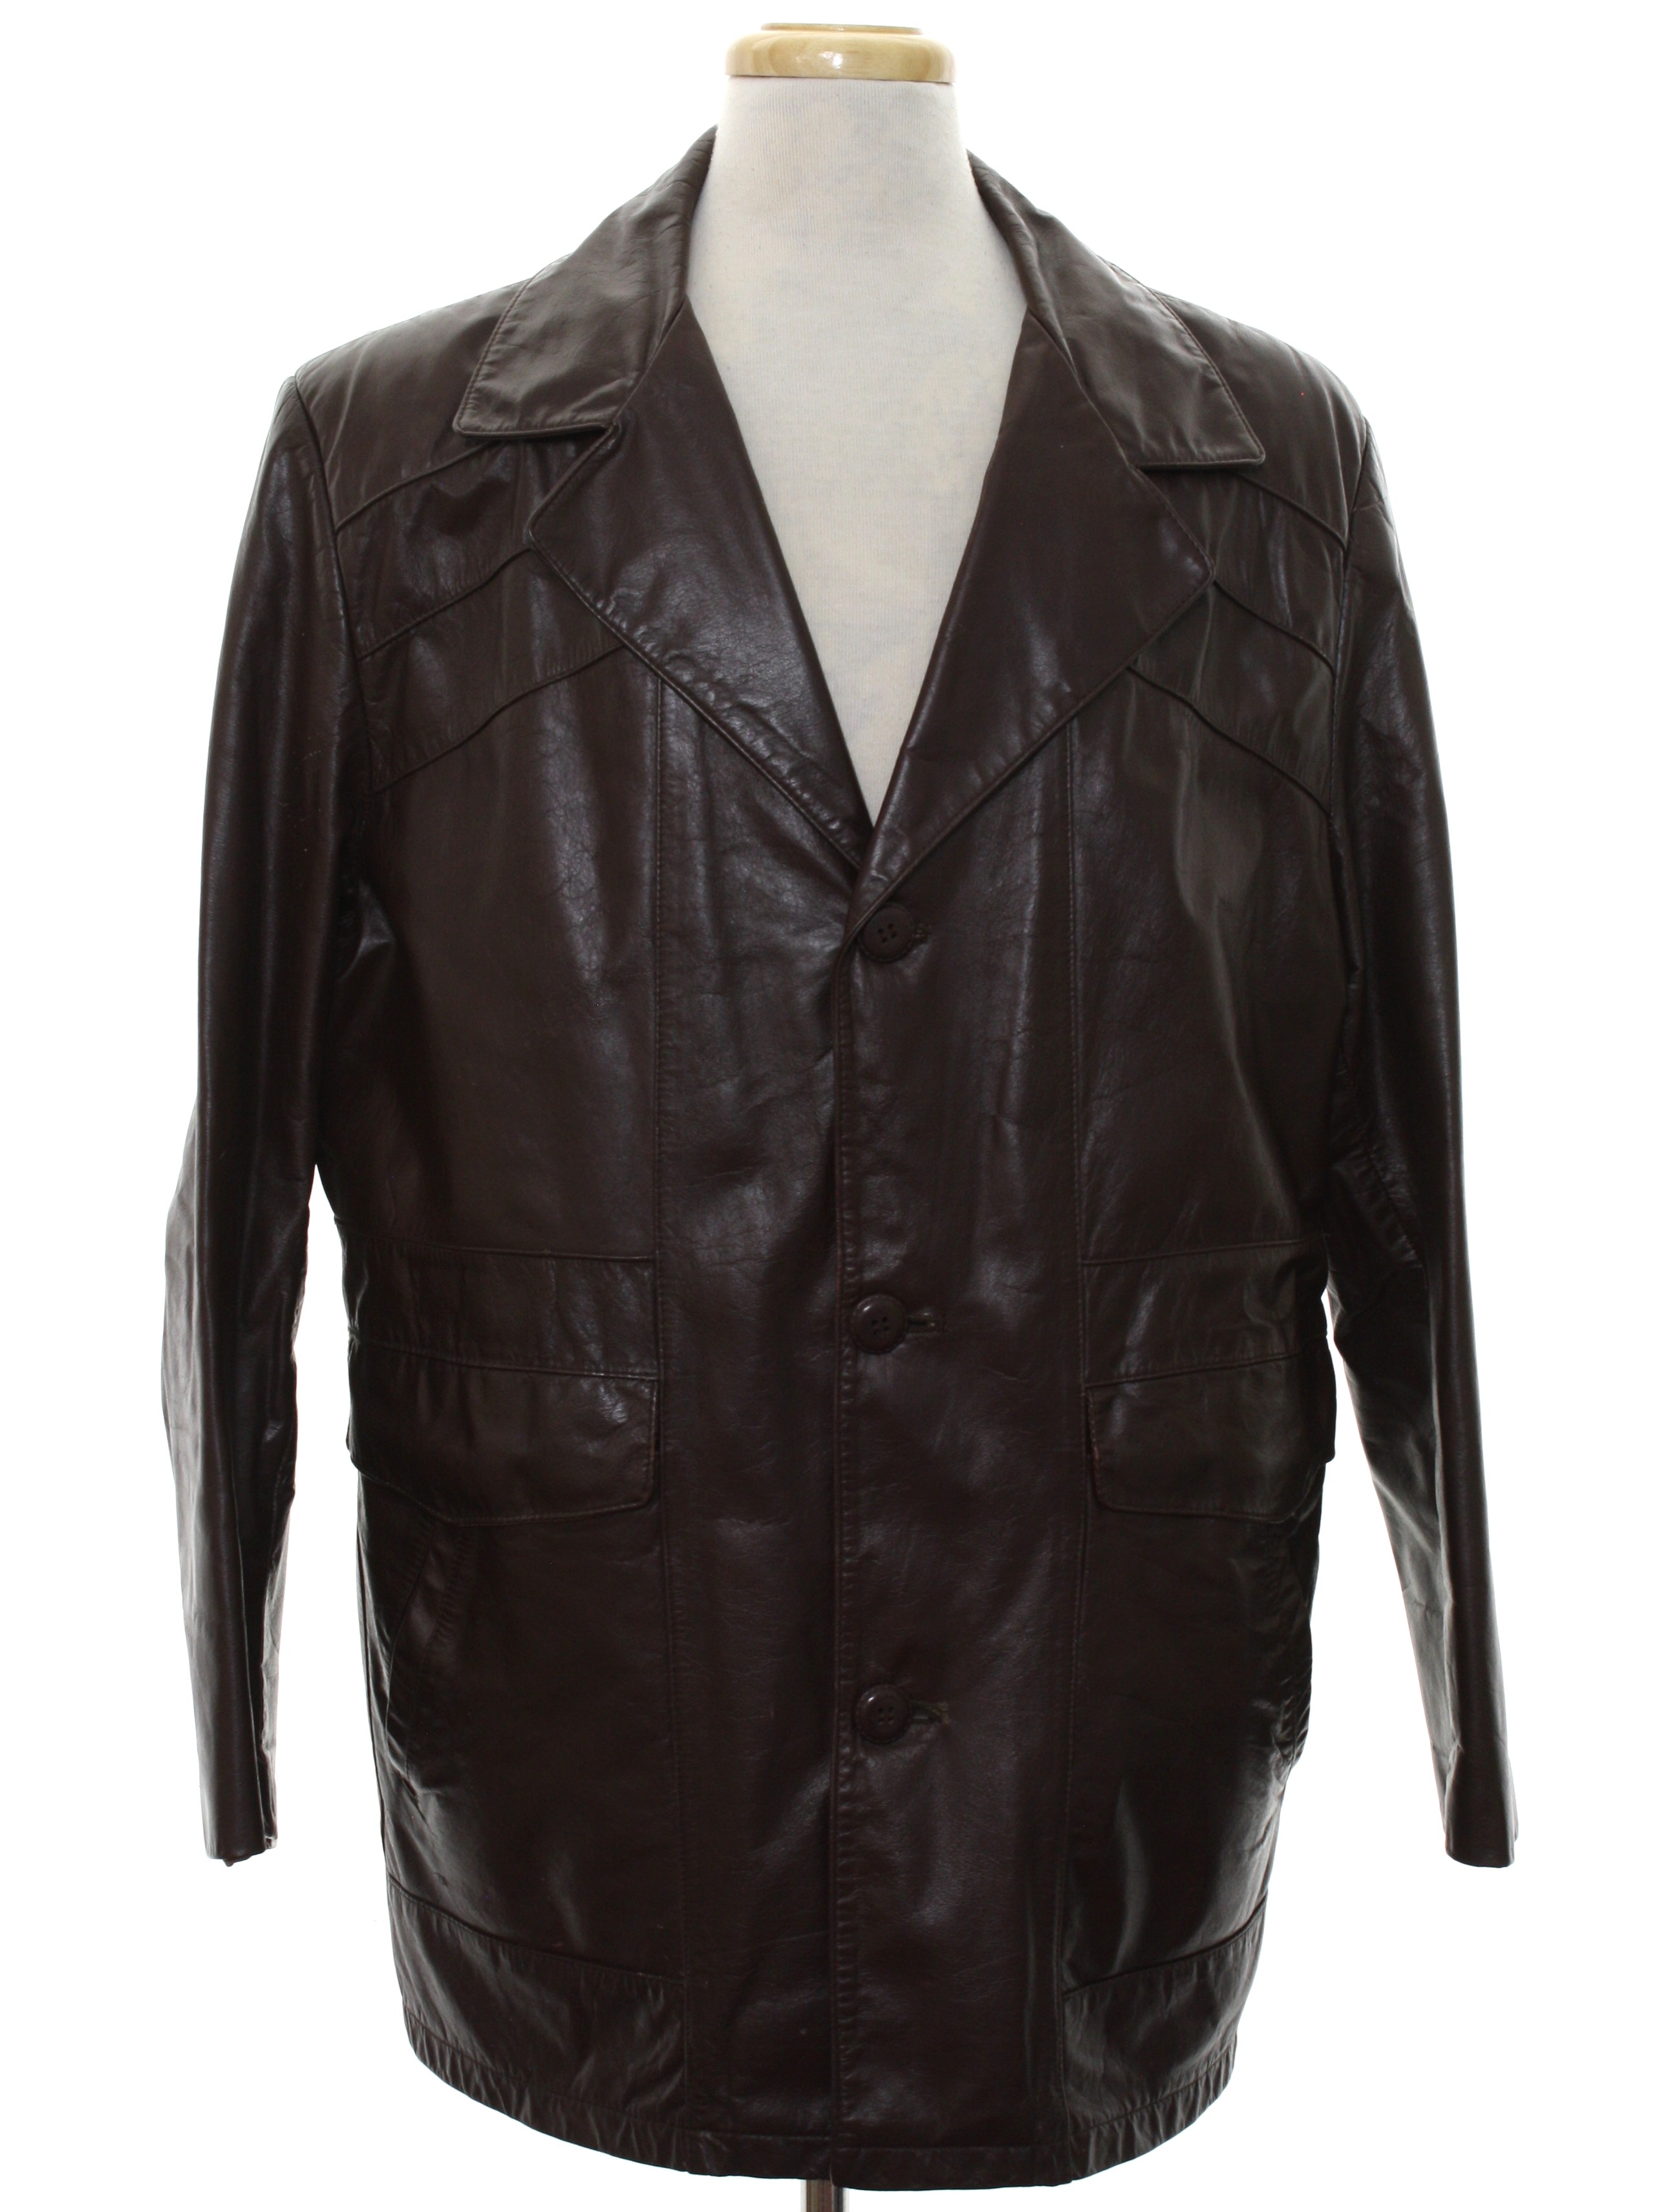 70's Vintage Leather Jacket: Late 70s or Early 80s -The Leather ...